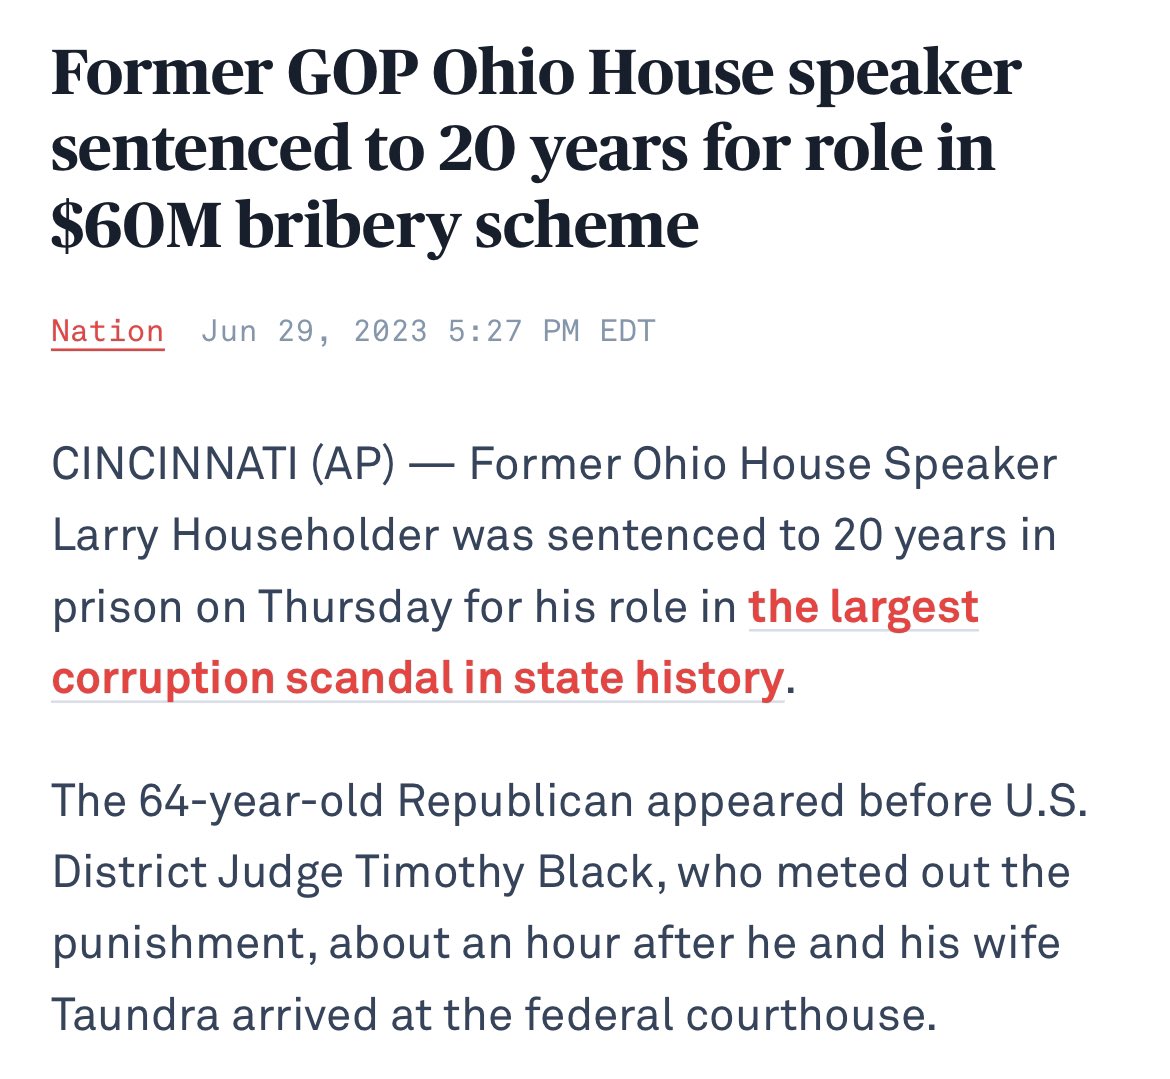 Ohio's top utility regulator was being bribed by an electric company to get over a billion dollars in legislative bailouts and taxpayer handouts. The former GOP Ohio House Speaker was already sentenced to 20 years for his role in this. These are the real thugs in America.